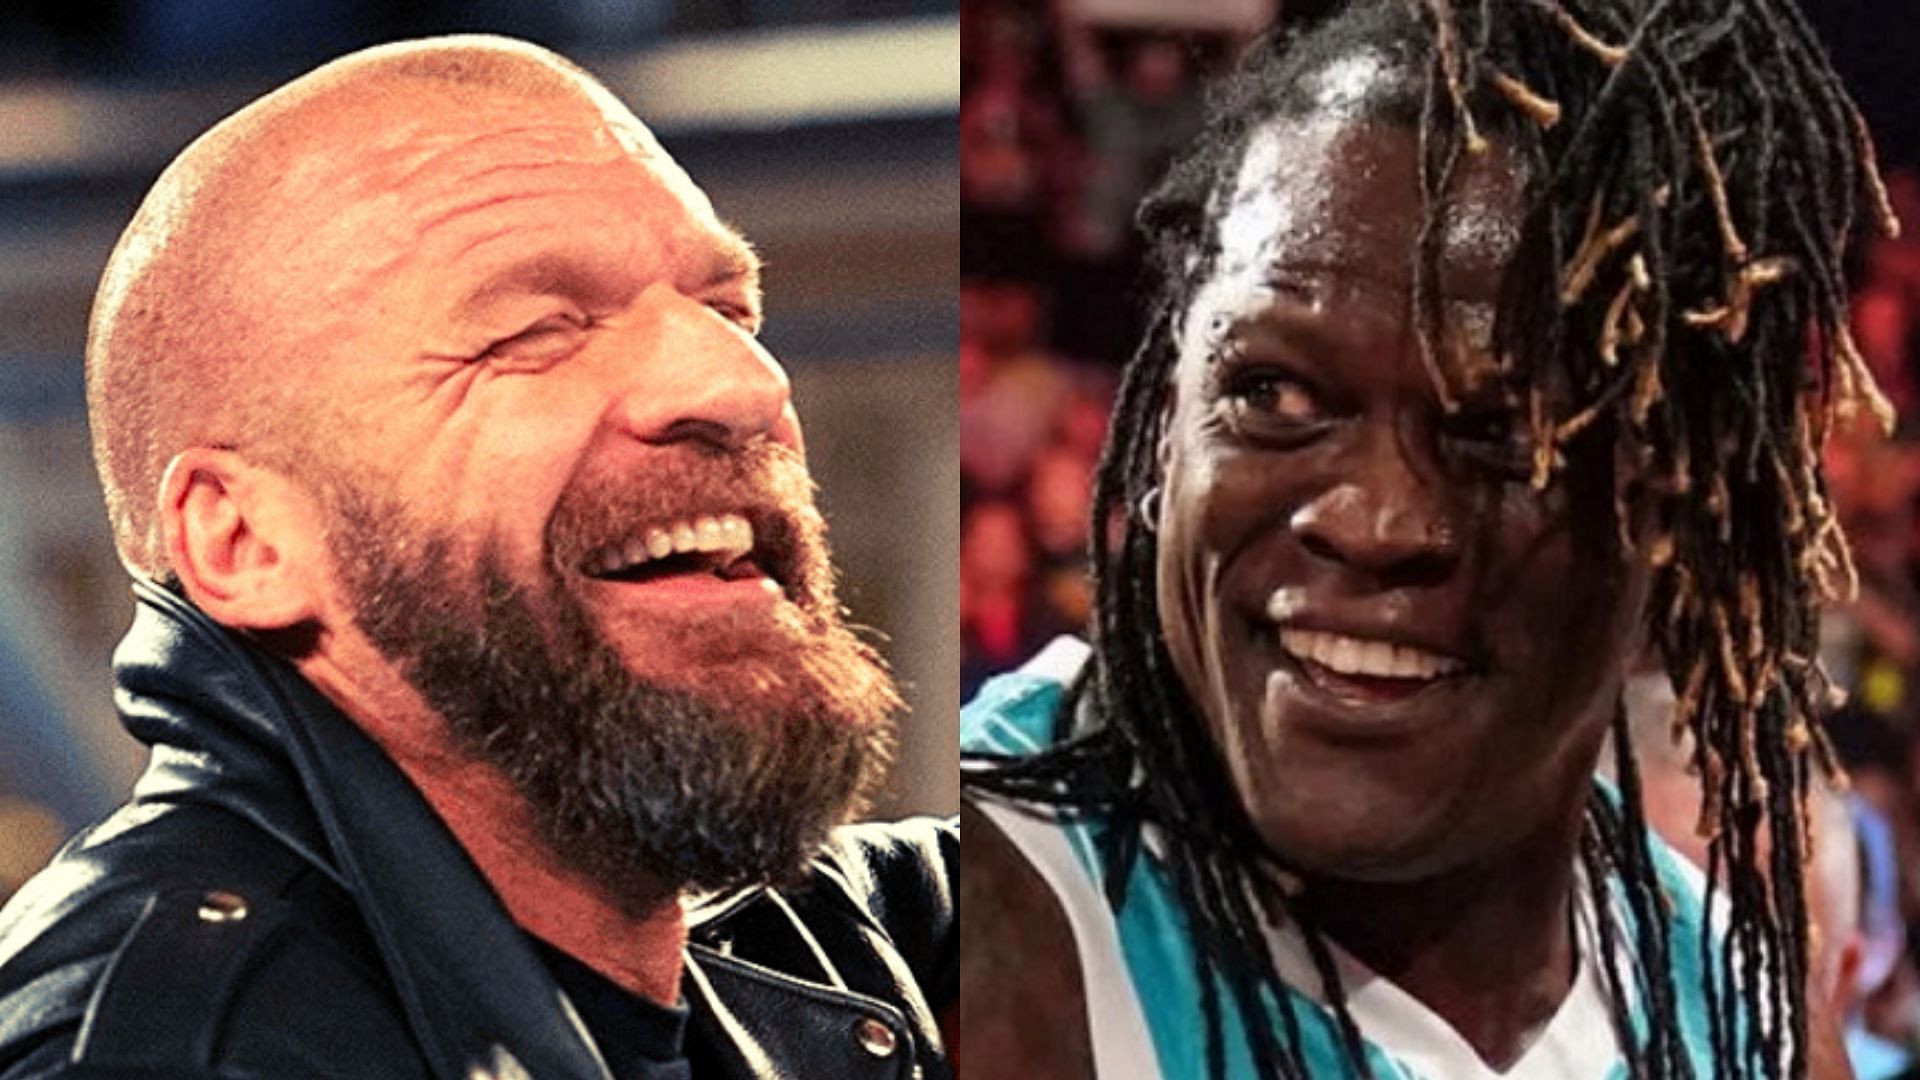 Triple H and R-Truth wrestled back in 2011 in tag team action.